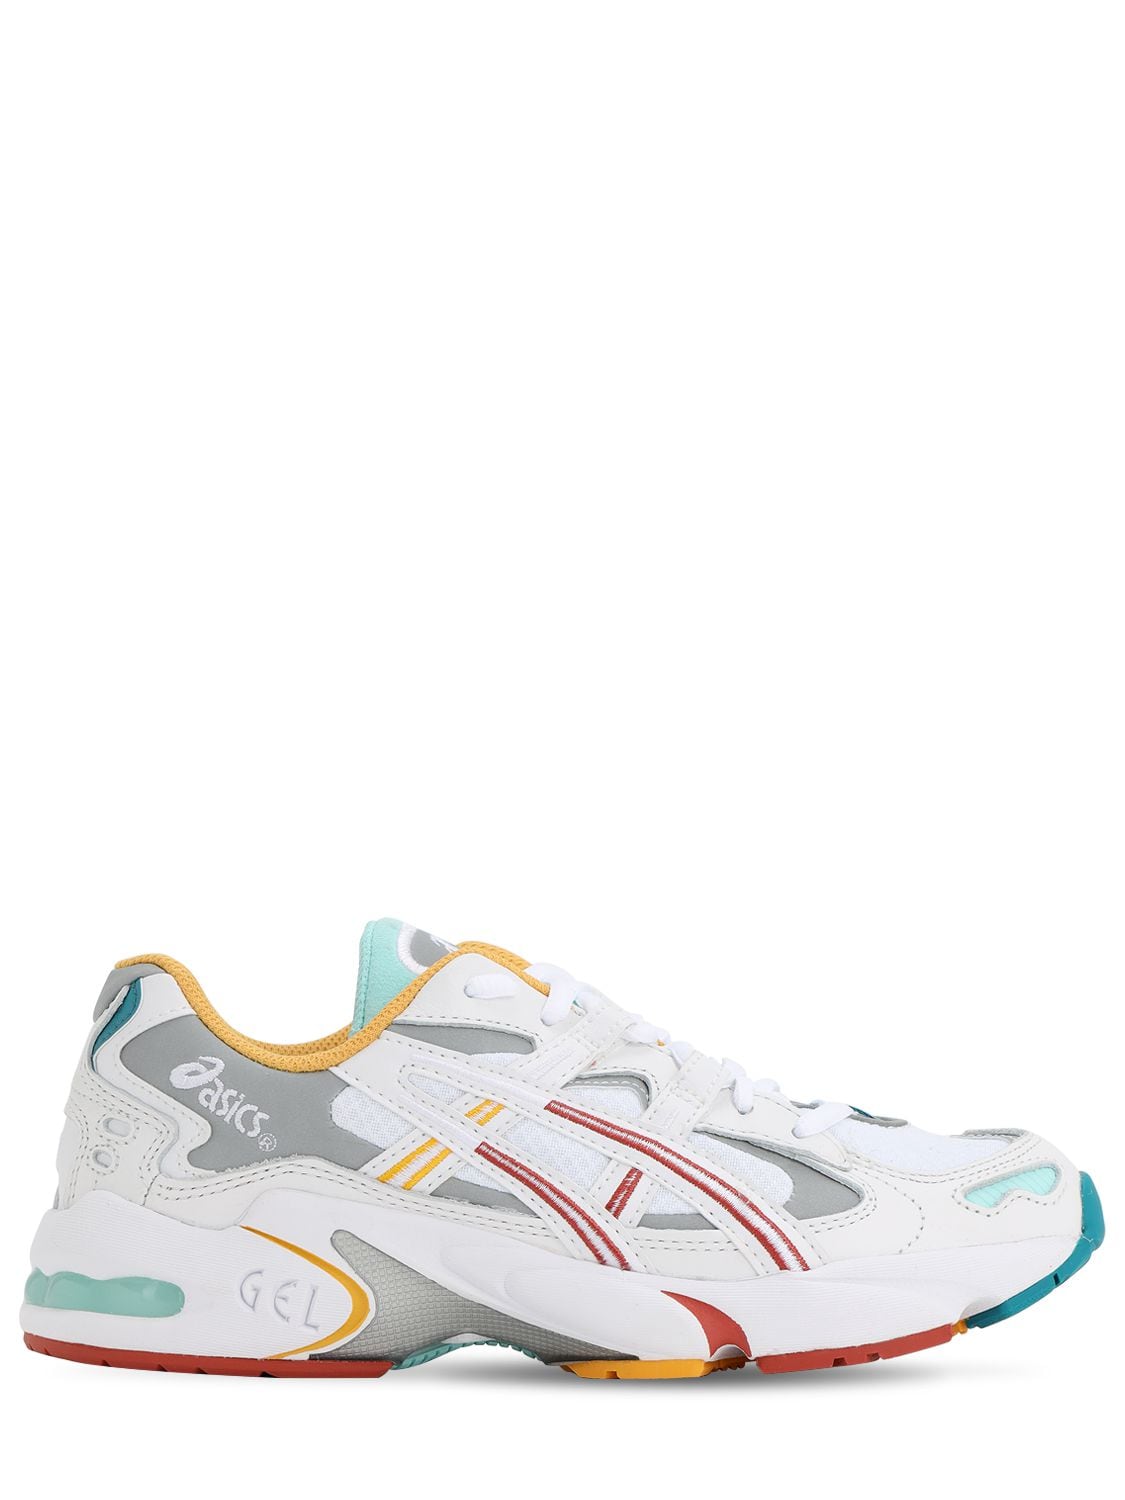 Asics Ronnie Fieg Kayano 5 Og Sneakers In White